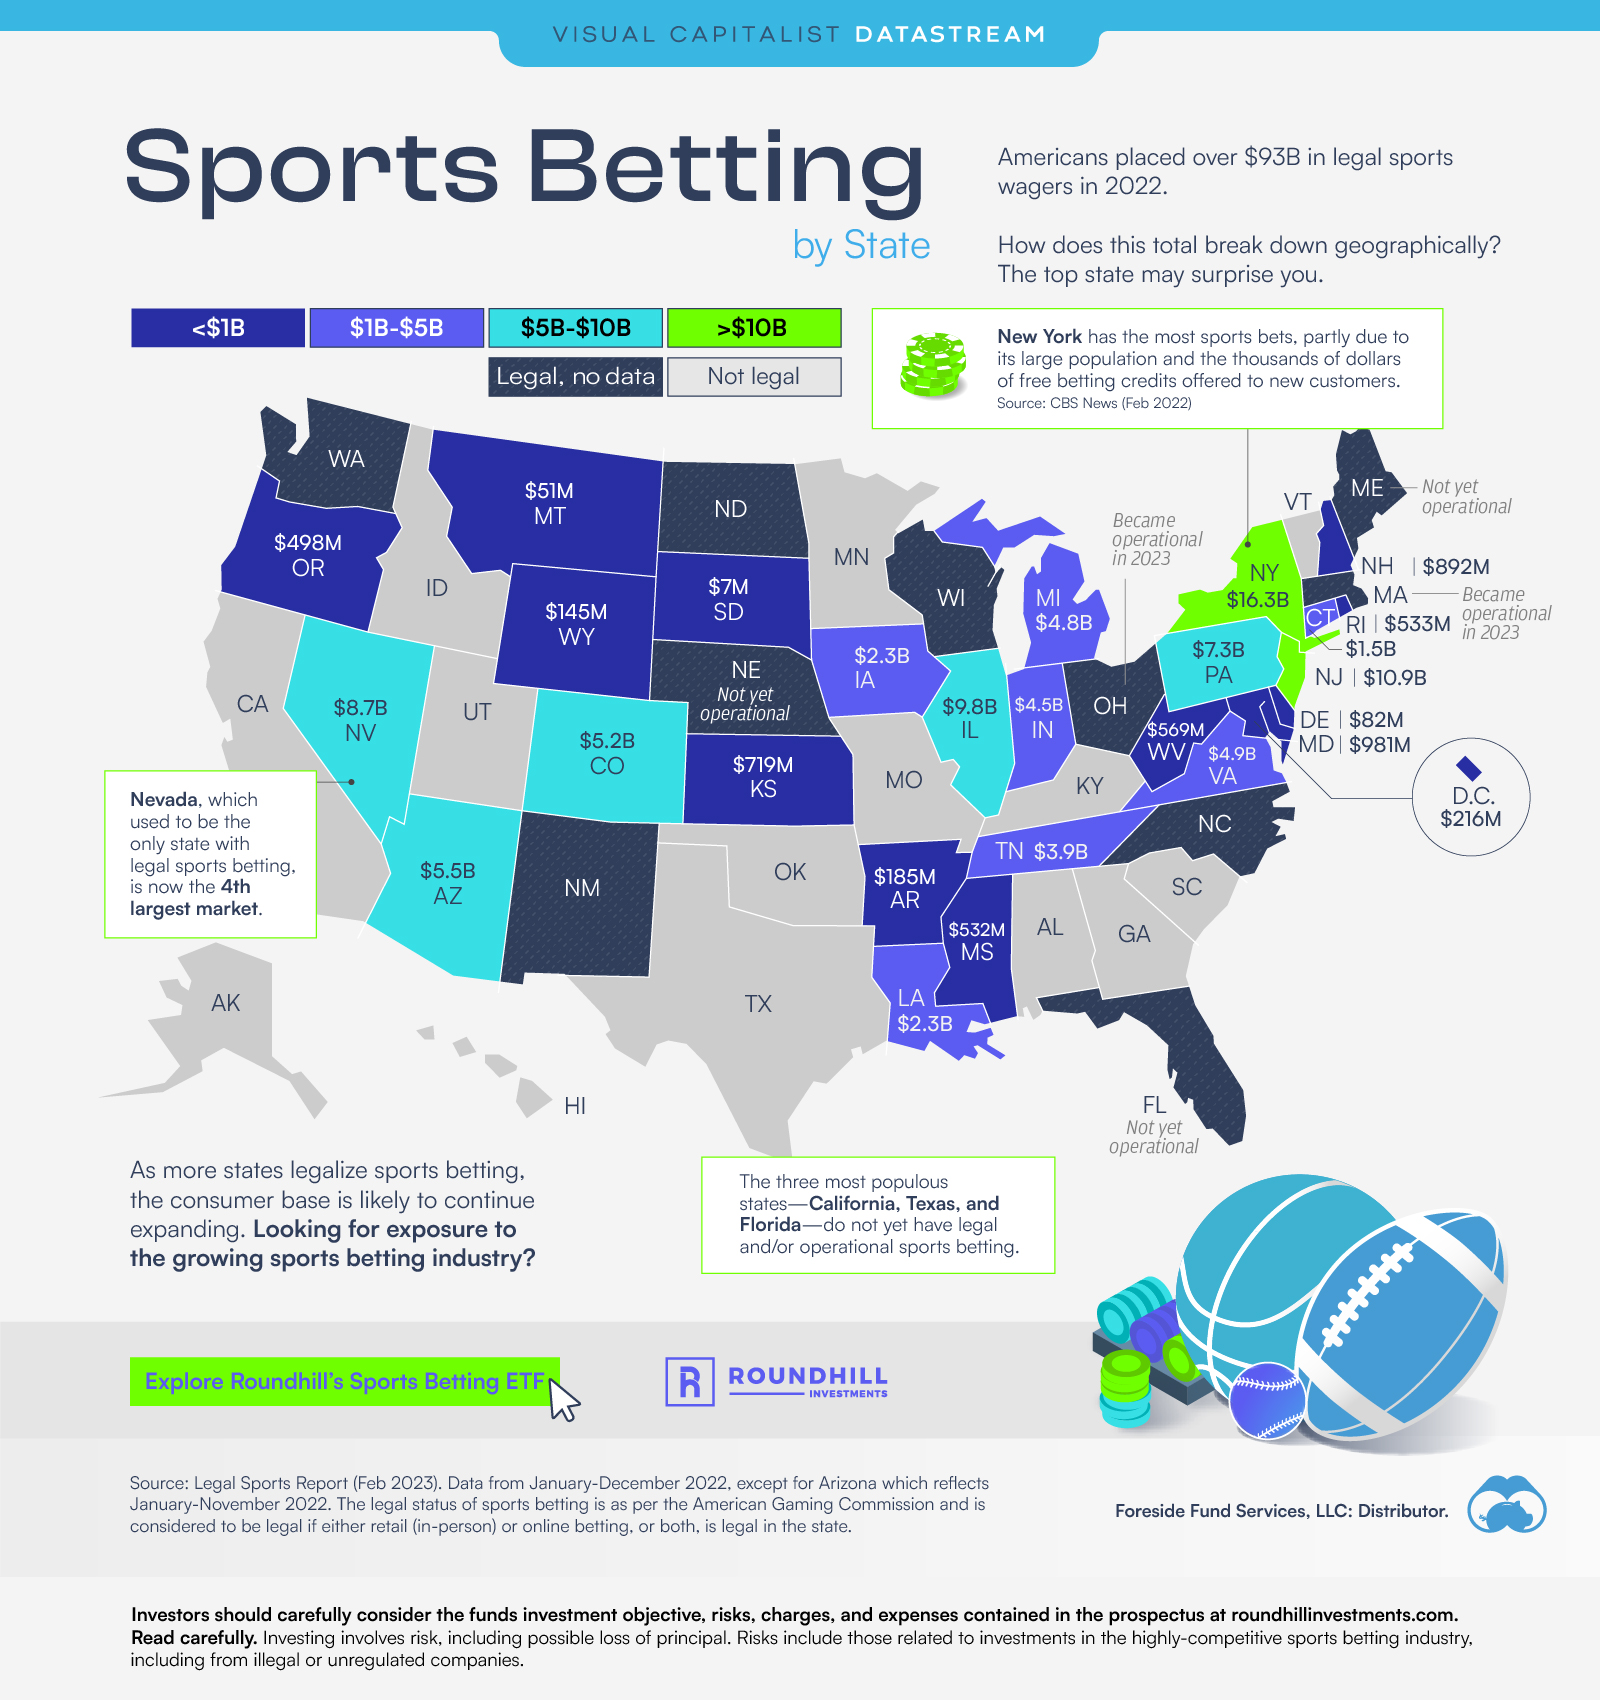 Photo: is sports betting legal in all states